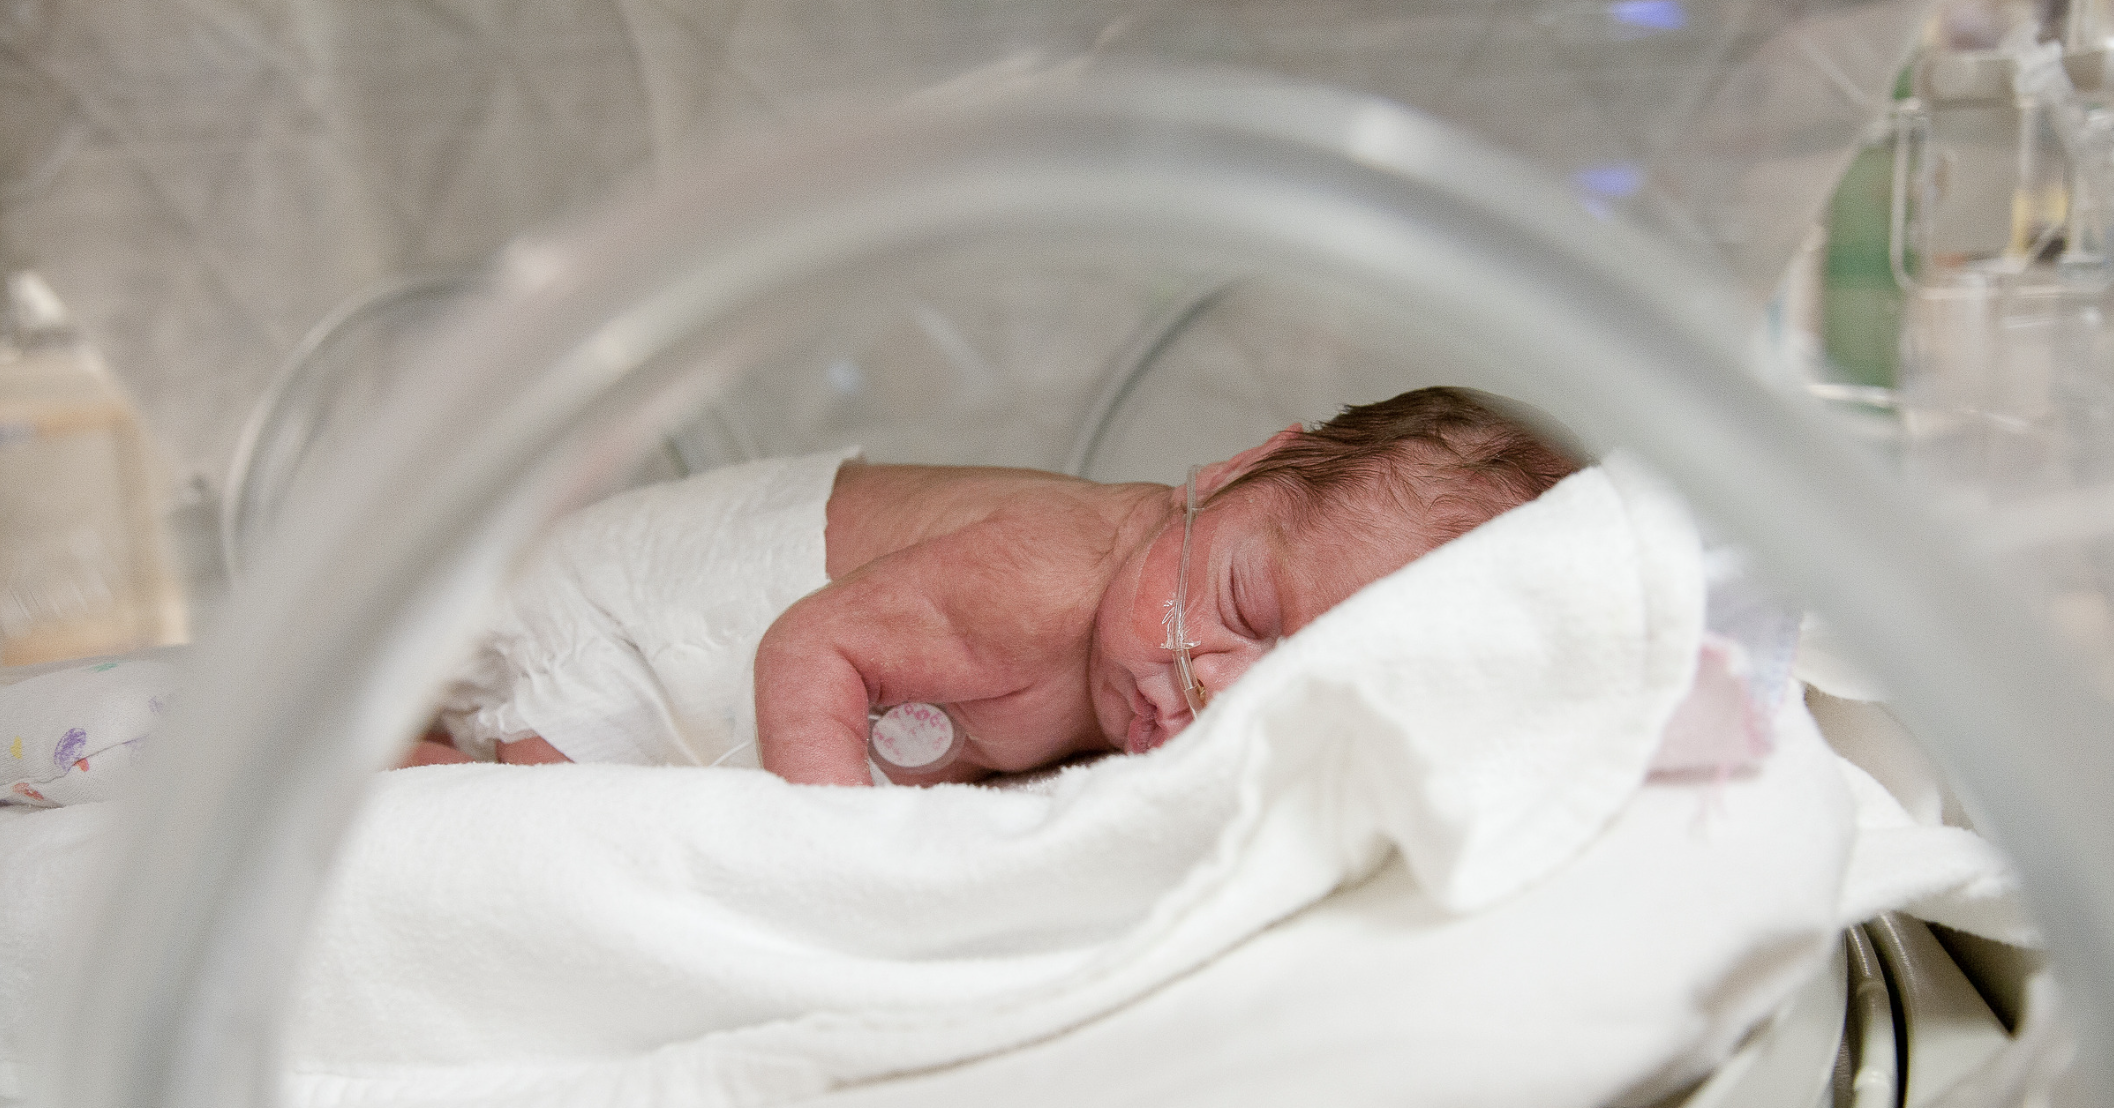 Prematurity Awareness: The Miracle of Life